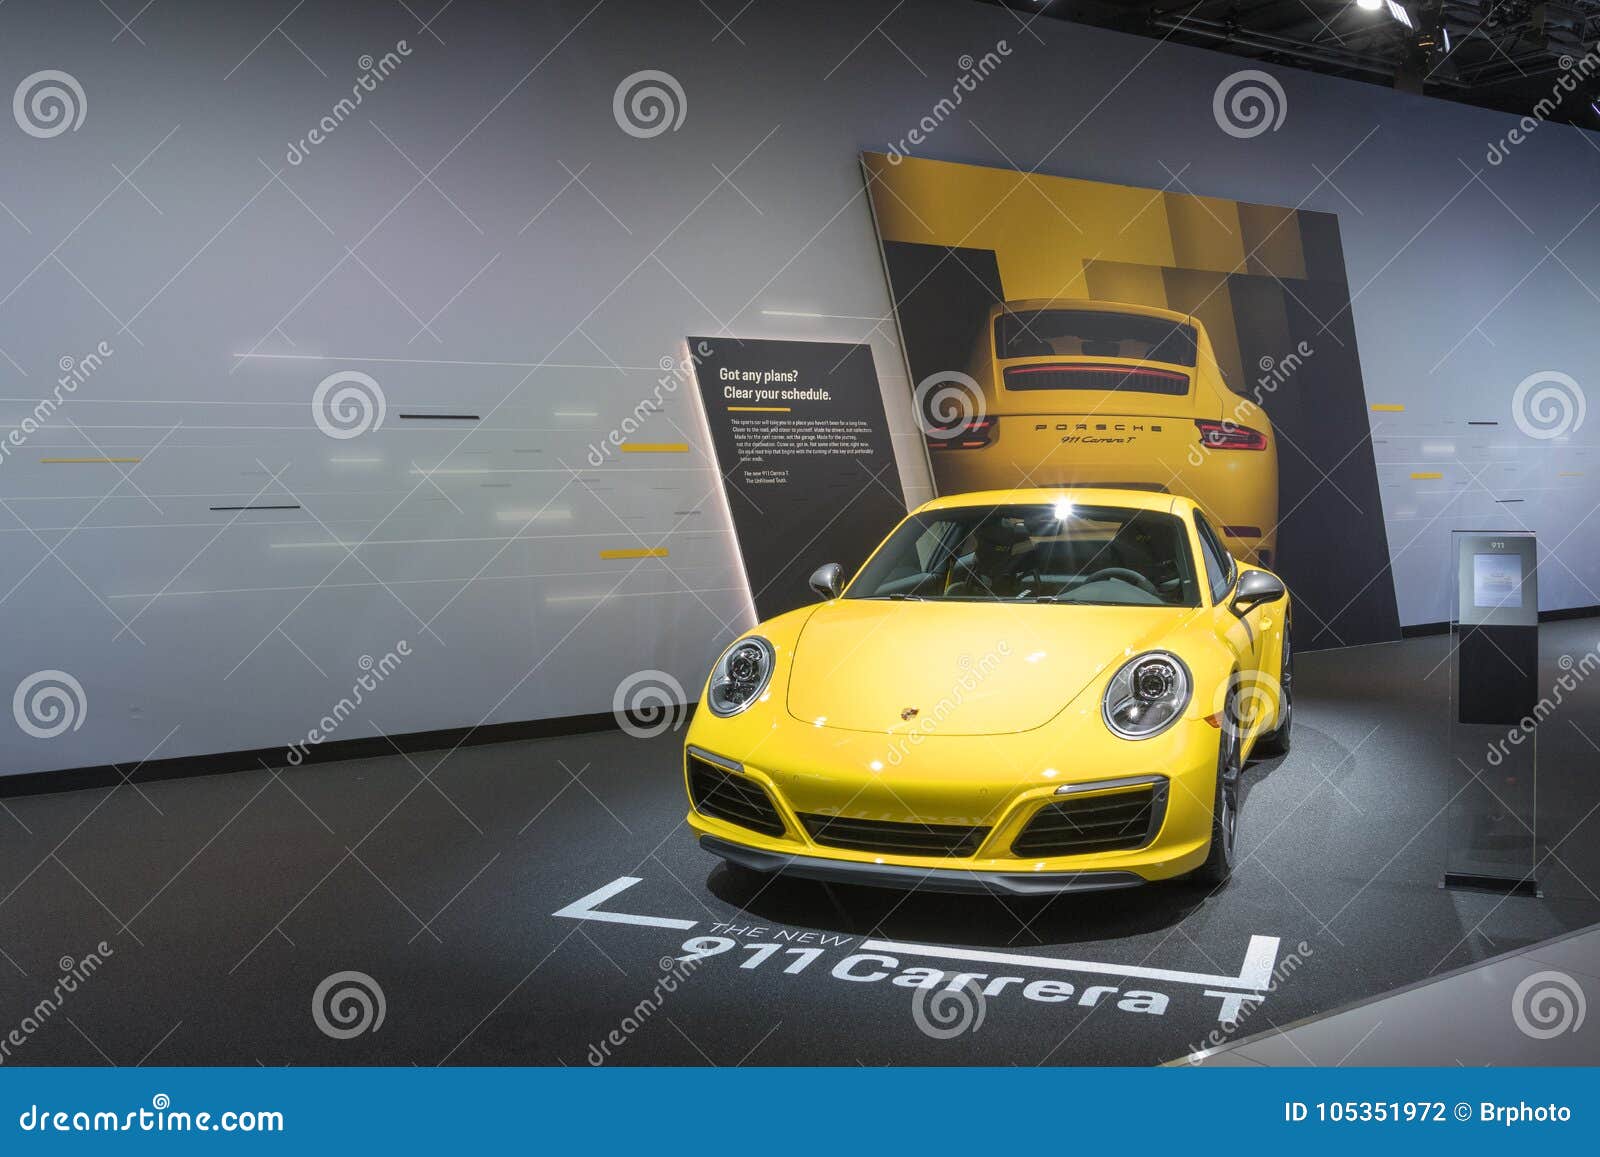 Porsche 911 Carrera T on Display during LA Auto Show Editorial Photography  - Image of concept, engine: 105351972